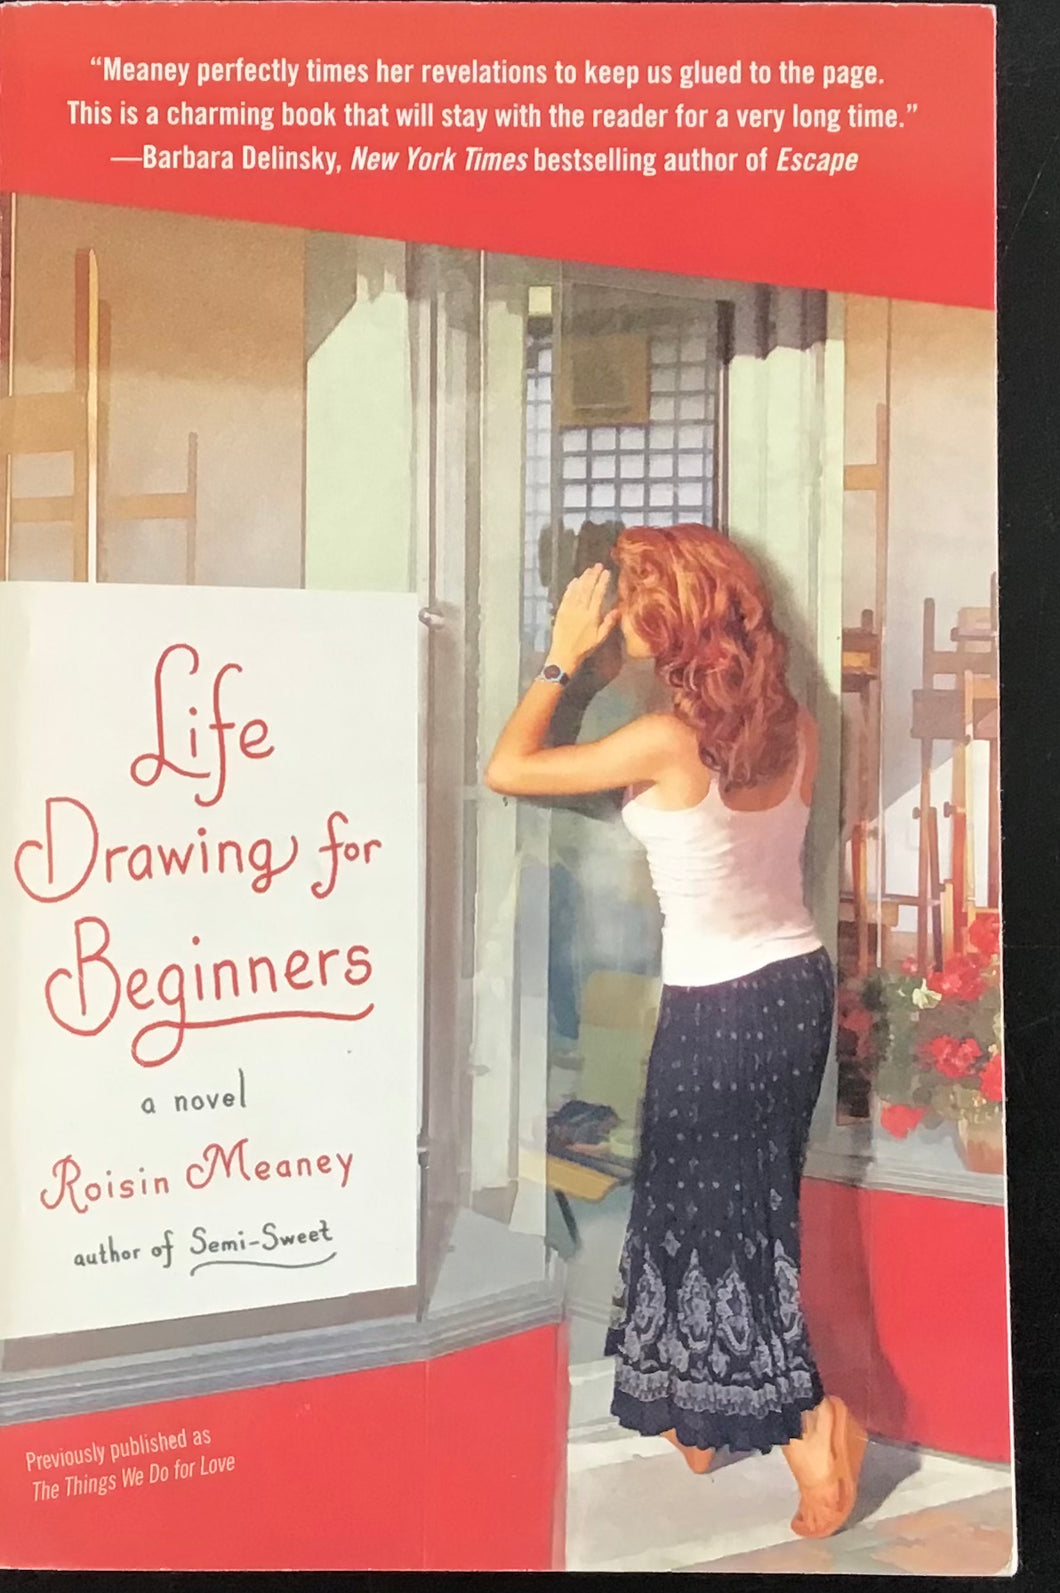 Life Drawing for Beginners, Roisin Meaney